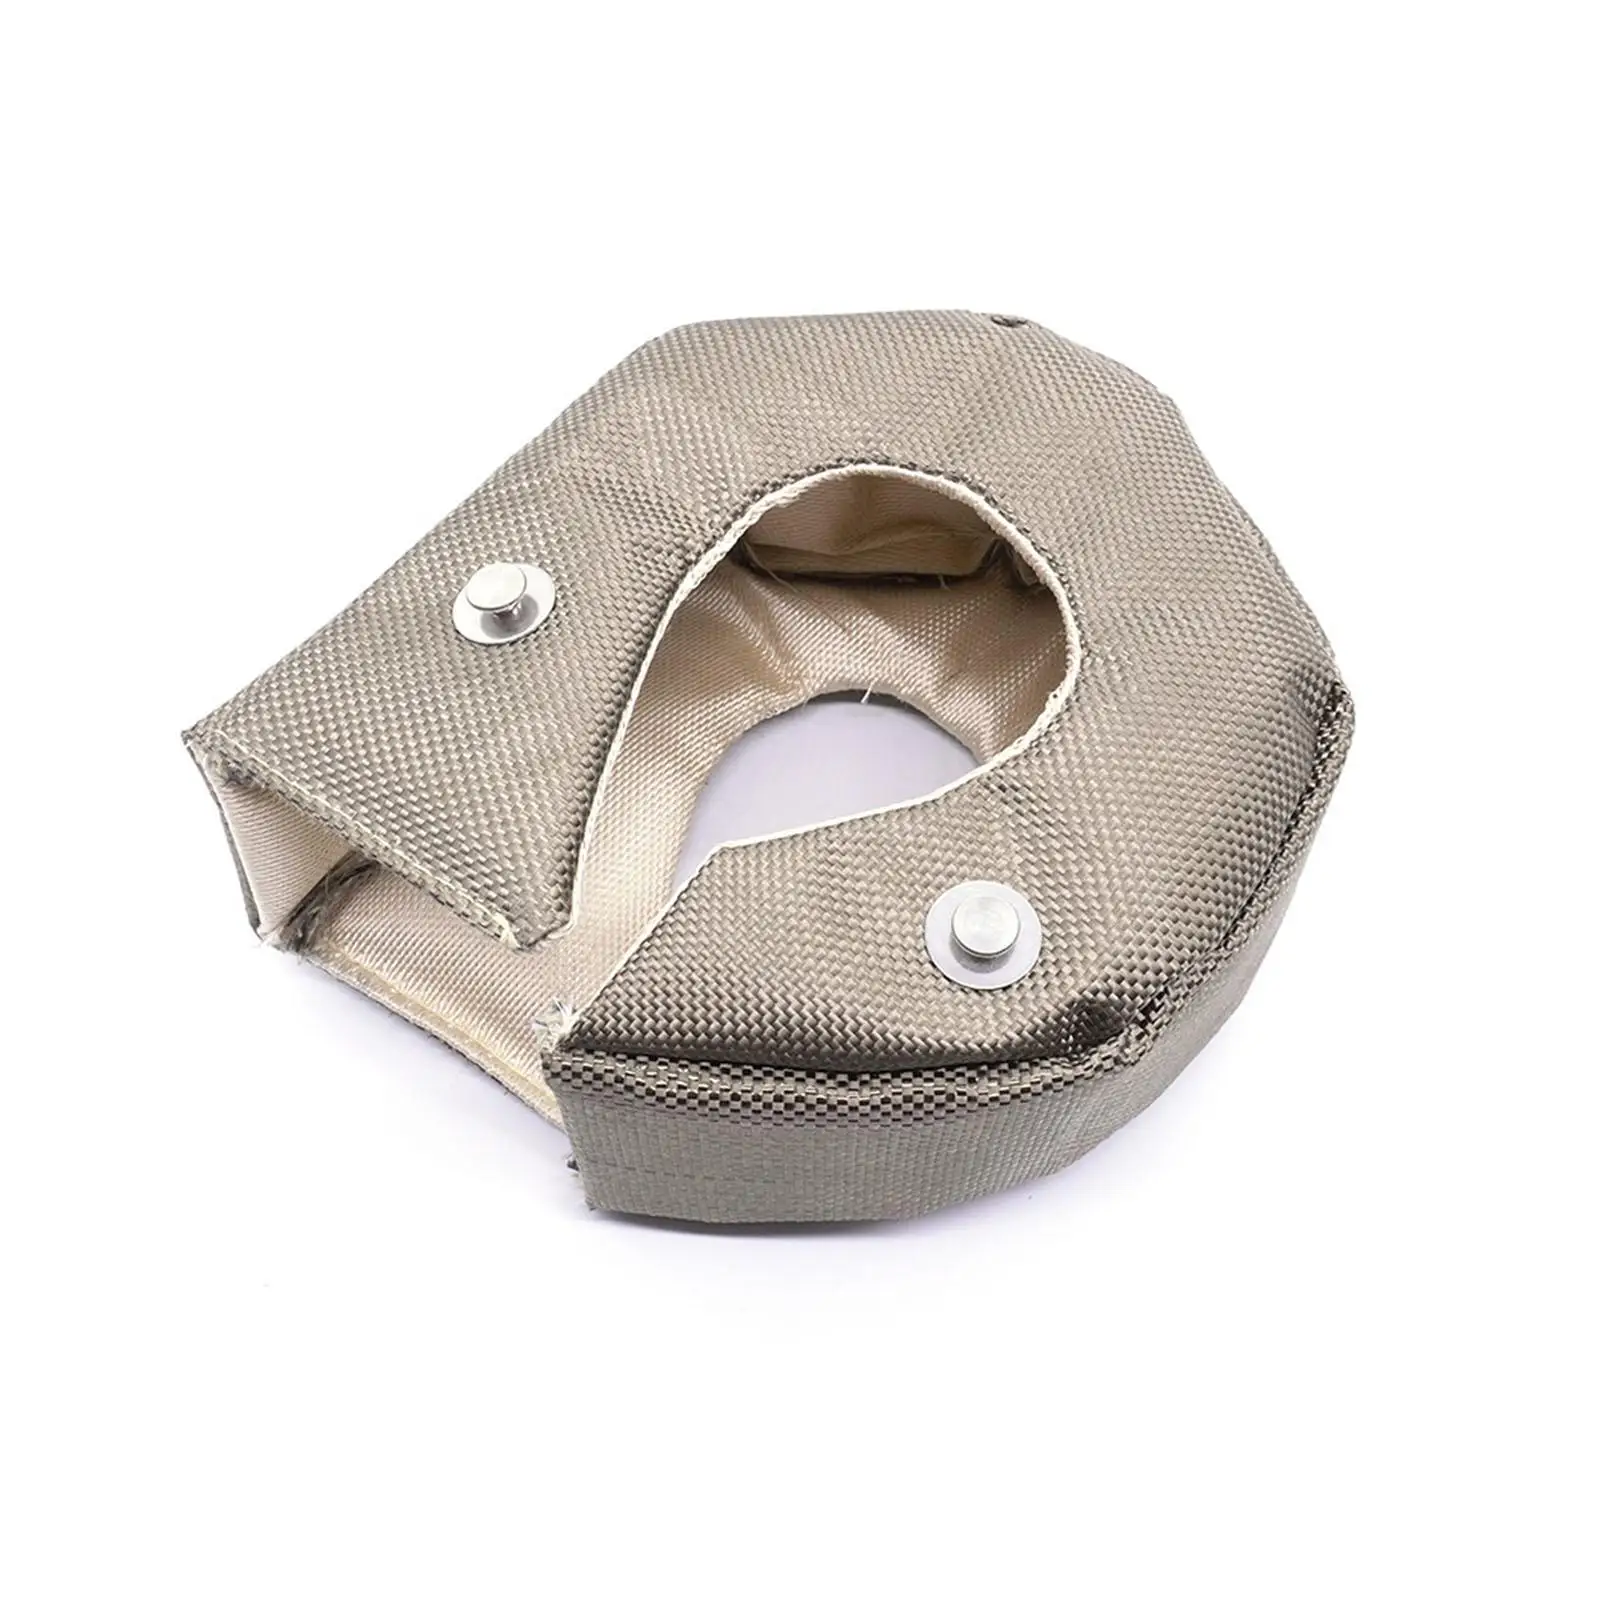 Turbocharger Thermal Heat Shield Cover with 2 Springs High Temperature Resistant Protection Cover Assembly Easy to Install